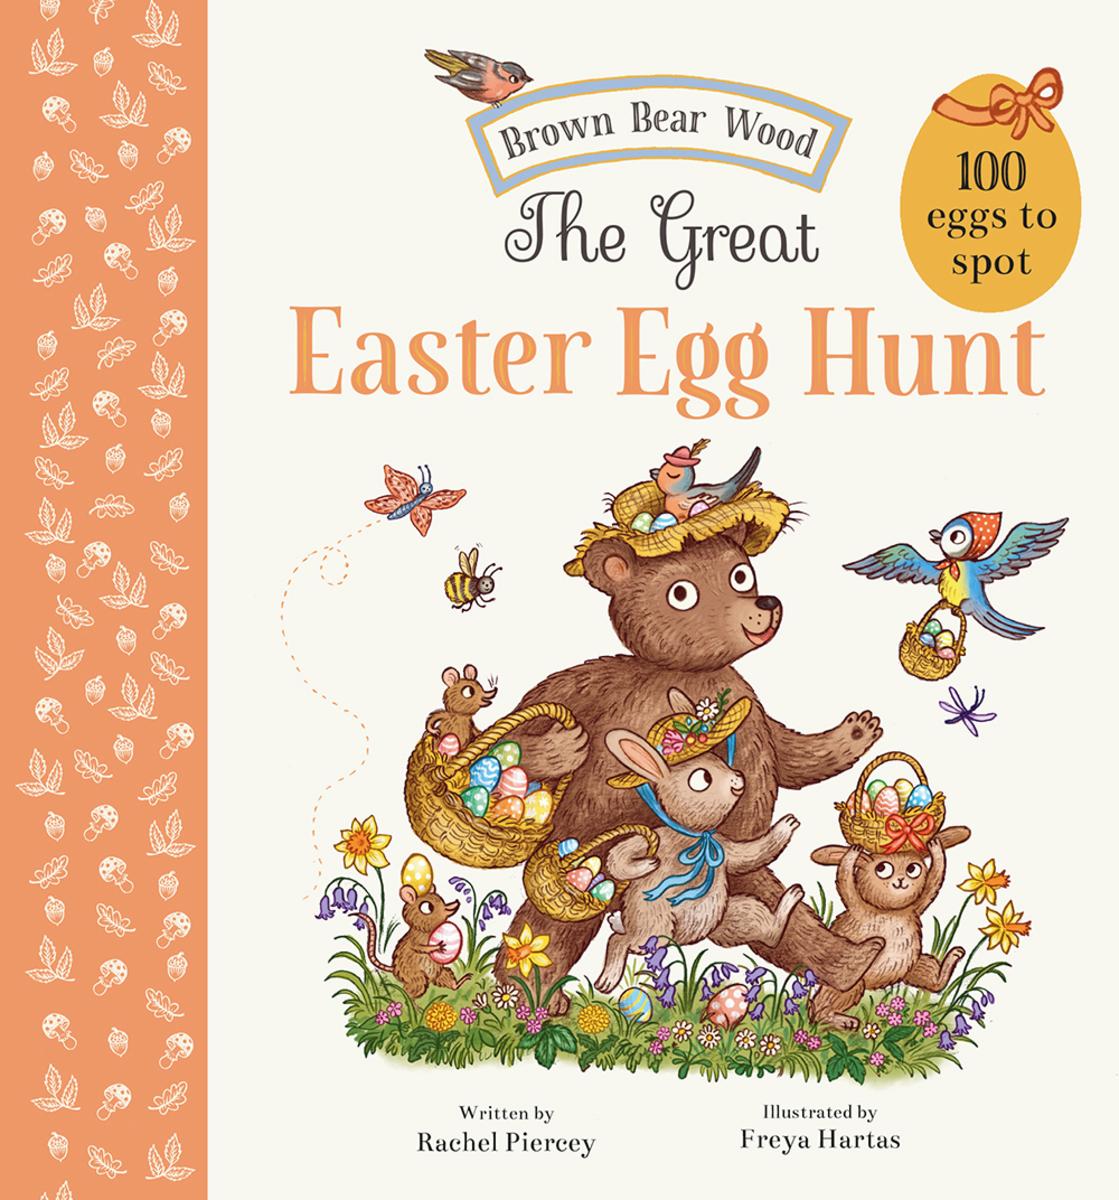 The Great Easter Egg Hunt - A Search and Find Adventure